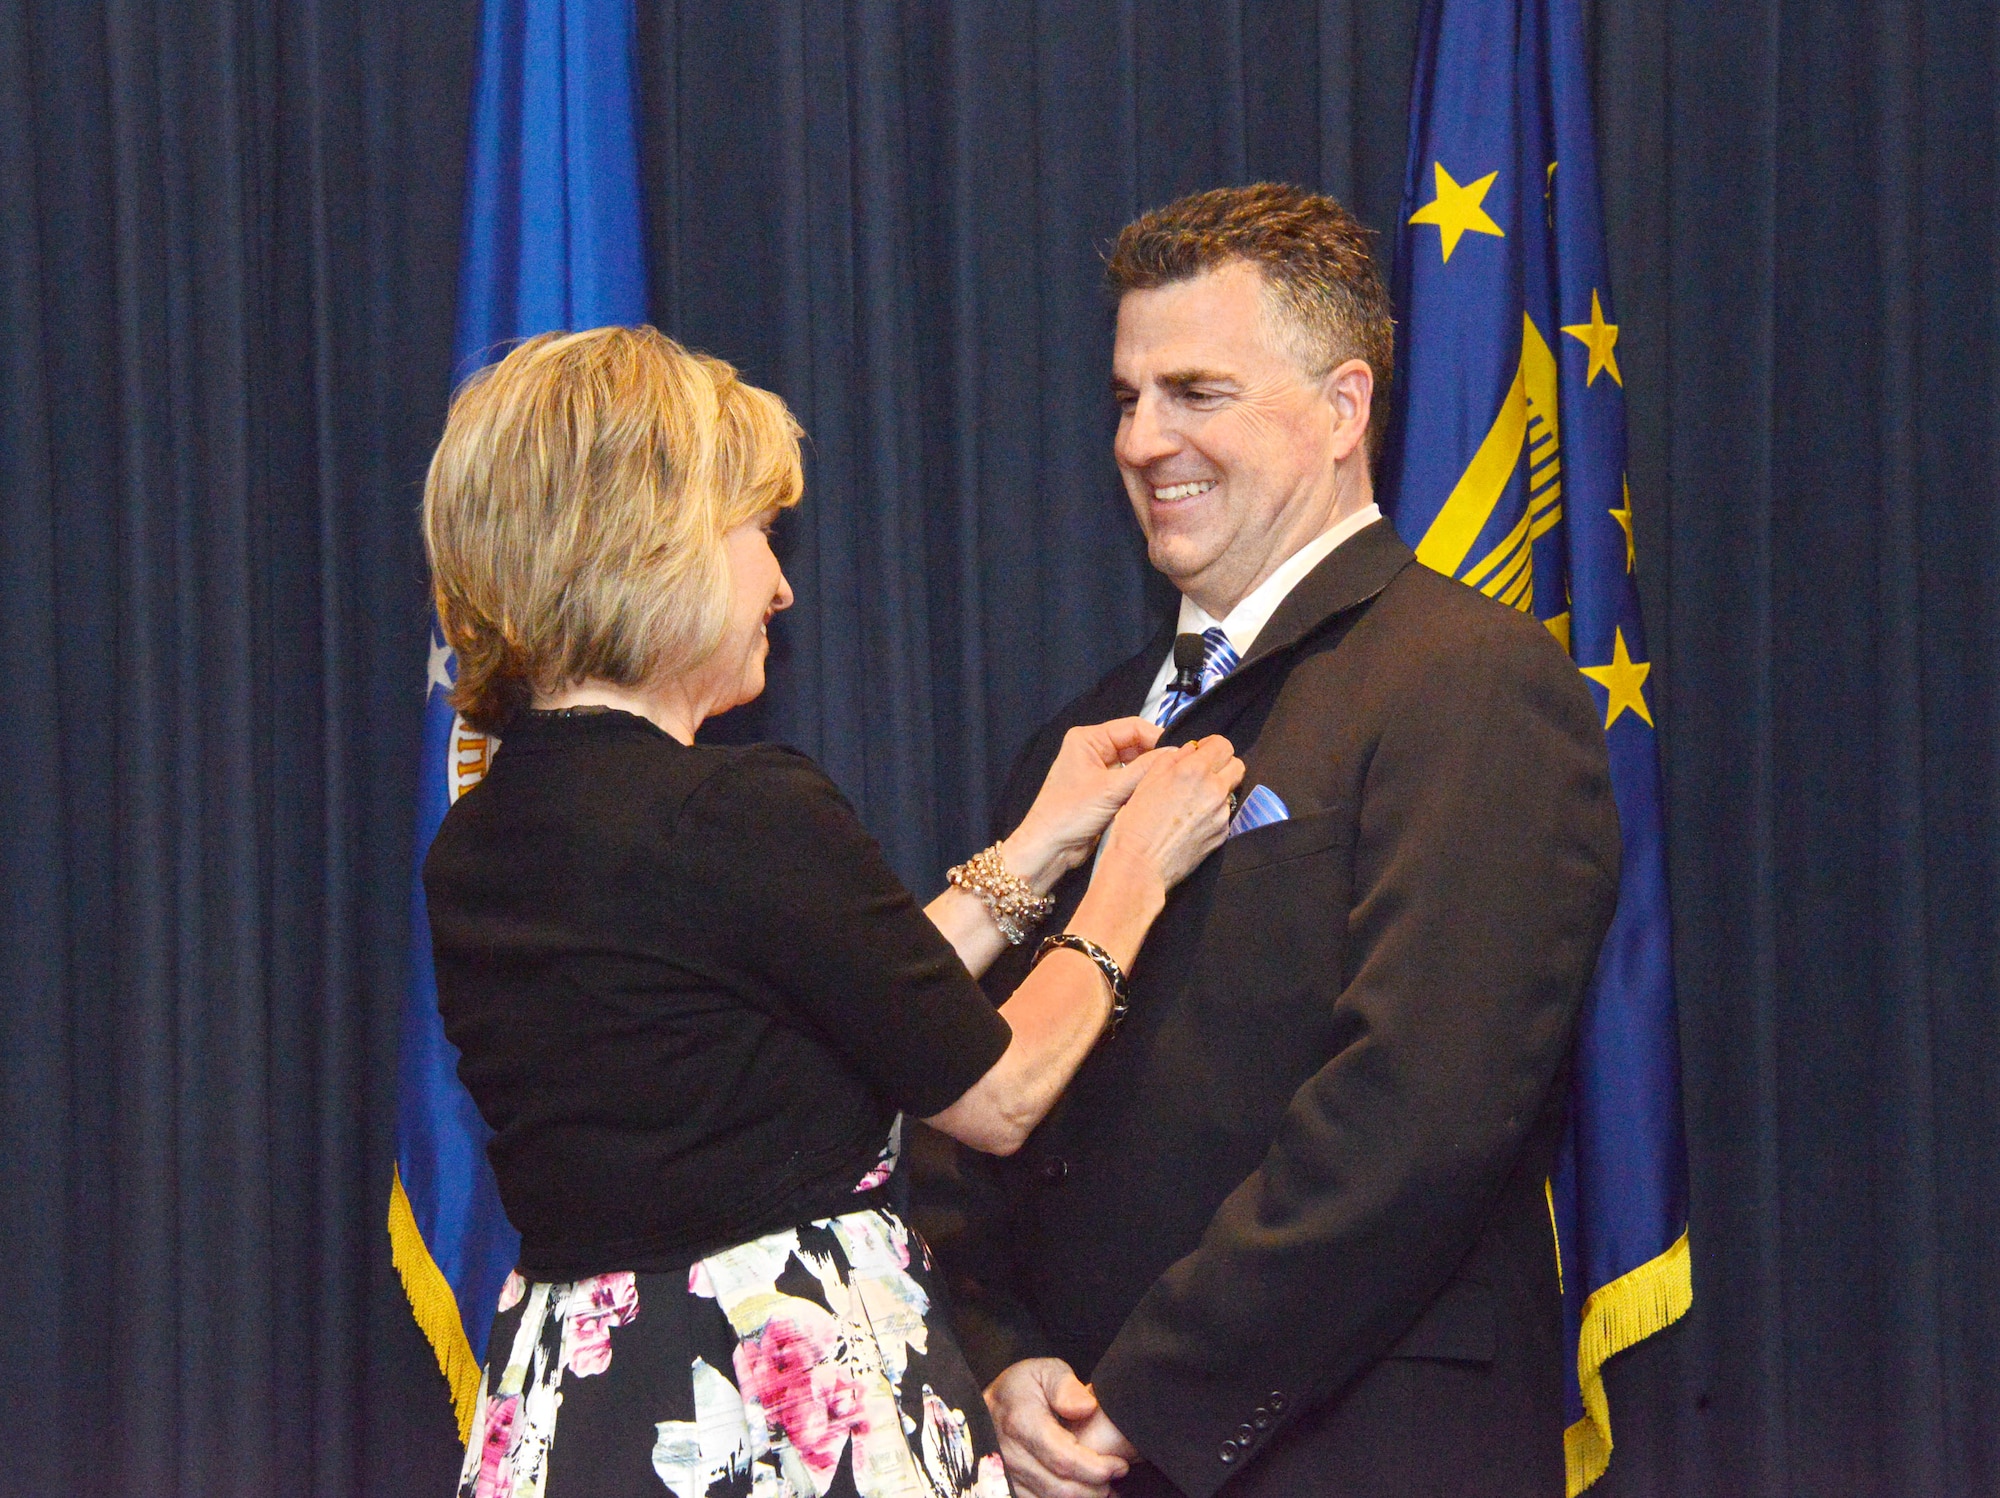 Mary Cooley pins on her husband, Thomas, the insignia of his new designation as an ST, or scientific professional. It is the highest rank a technical leader can achieve, considered to be the civilian equivalent of general. (Photo by Dennis Carlson)